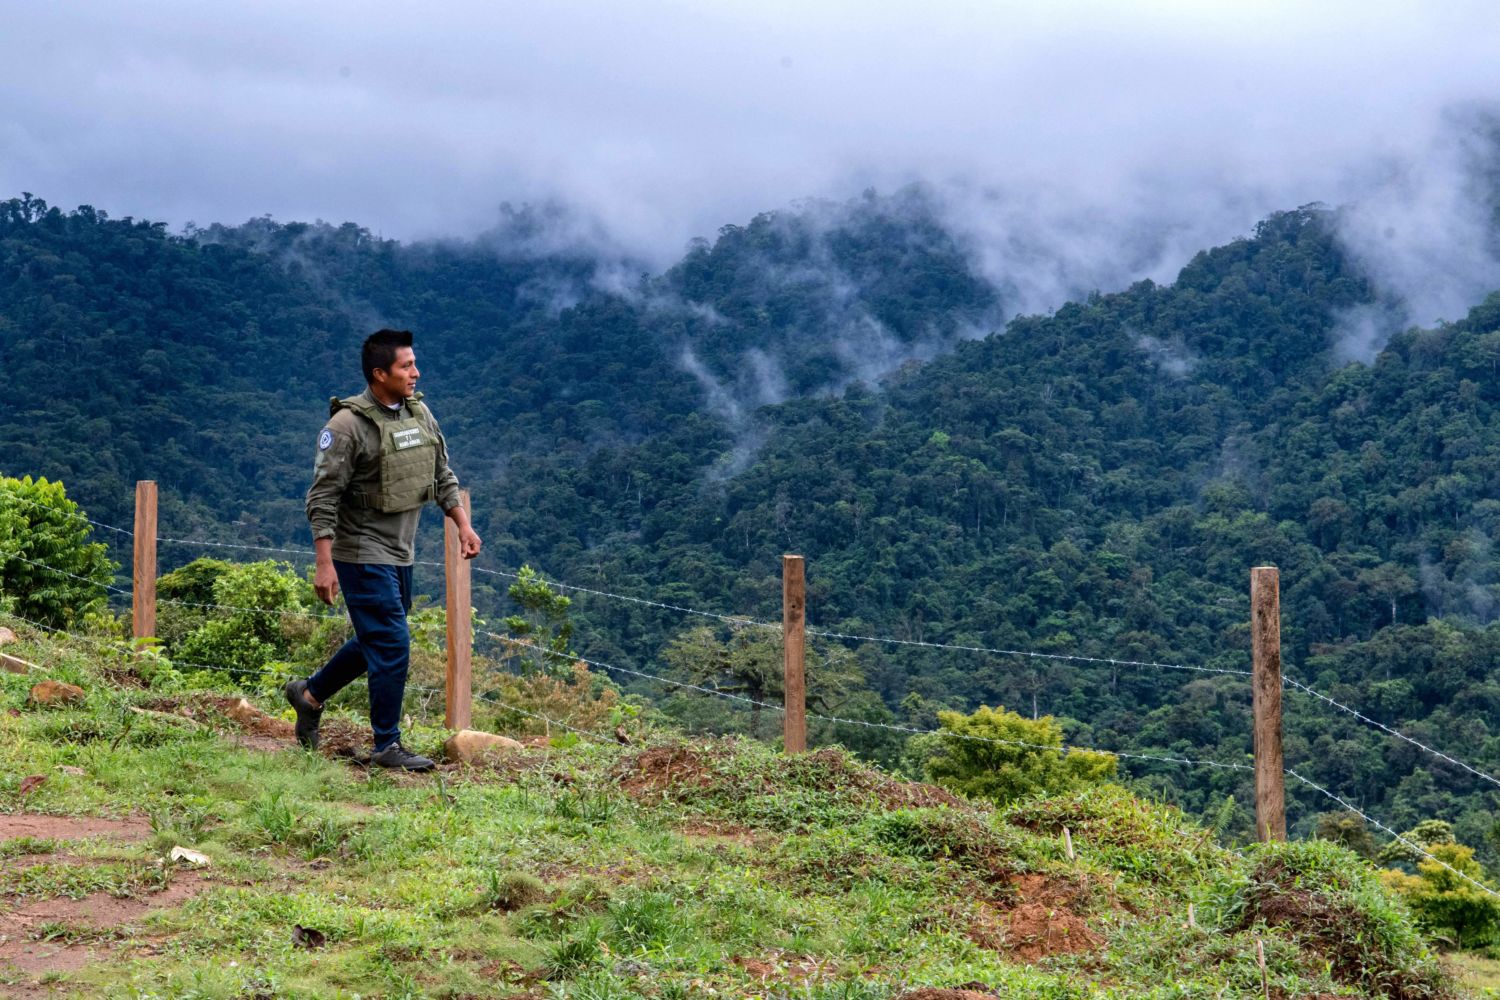 Lauded as Green Model, Costa Rica Faces Unrest in Its Forests - Yale E360